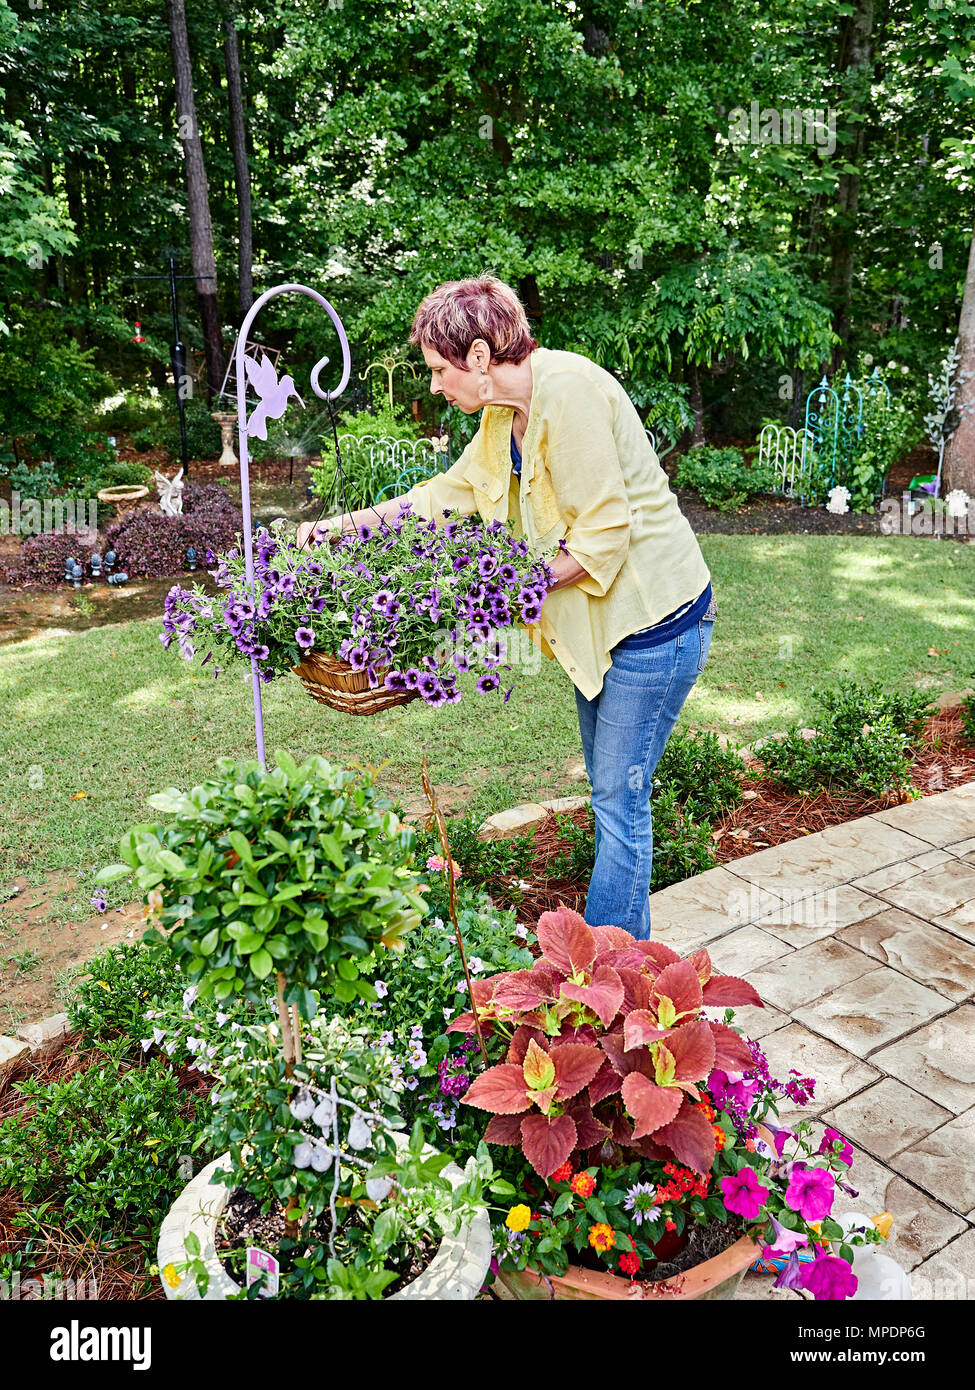 Mature woman gardener tending to her colorful hanging plant full of purple flowers, all part of her garden. Stock Photo